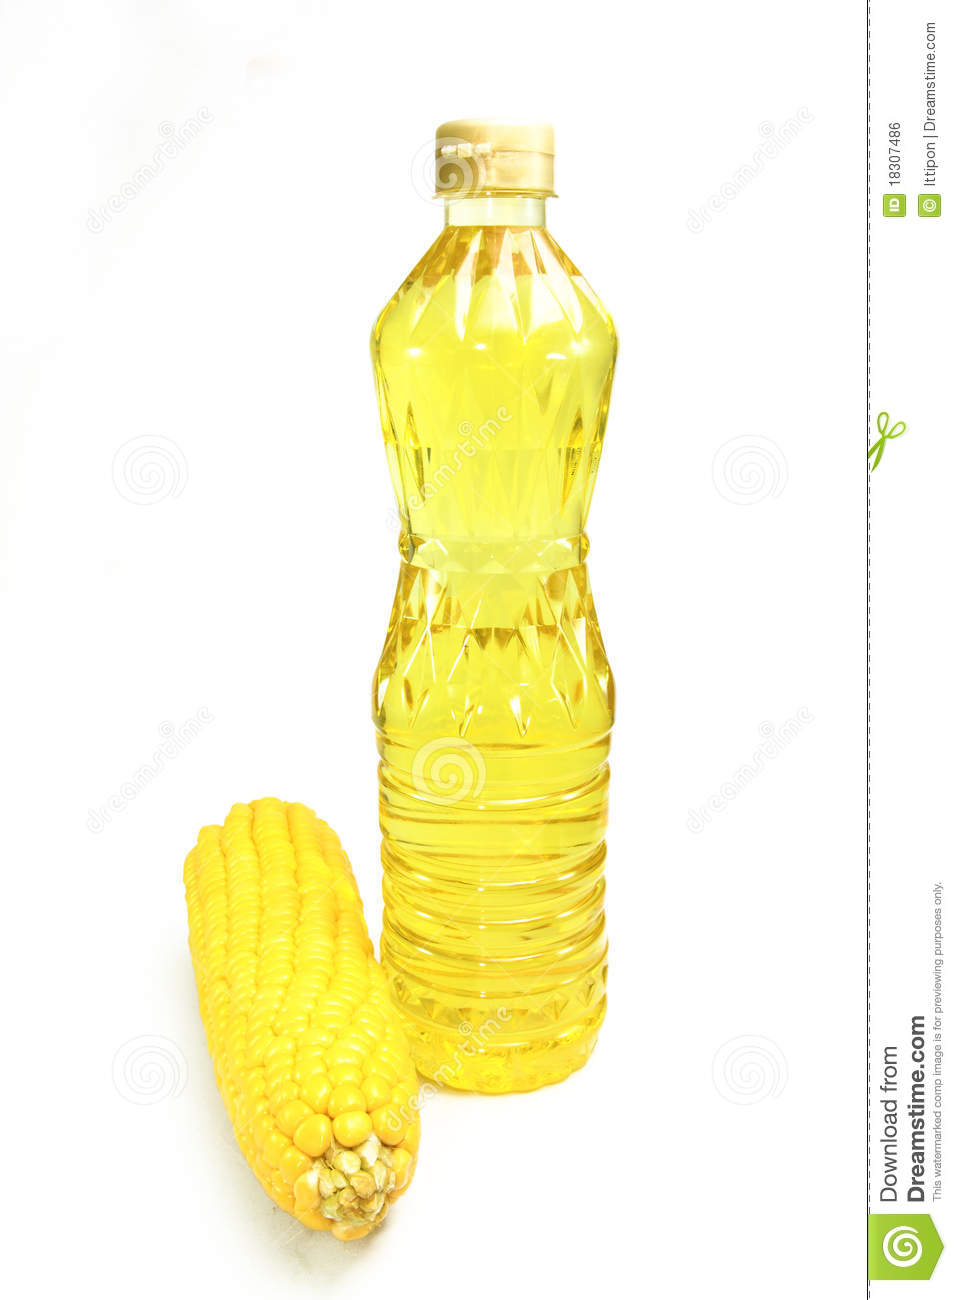 Vegetable Oil Royalty Free Stock Image   Image  18307486